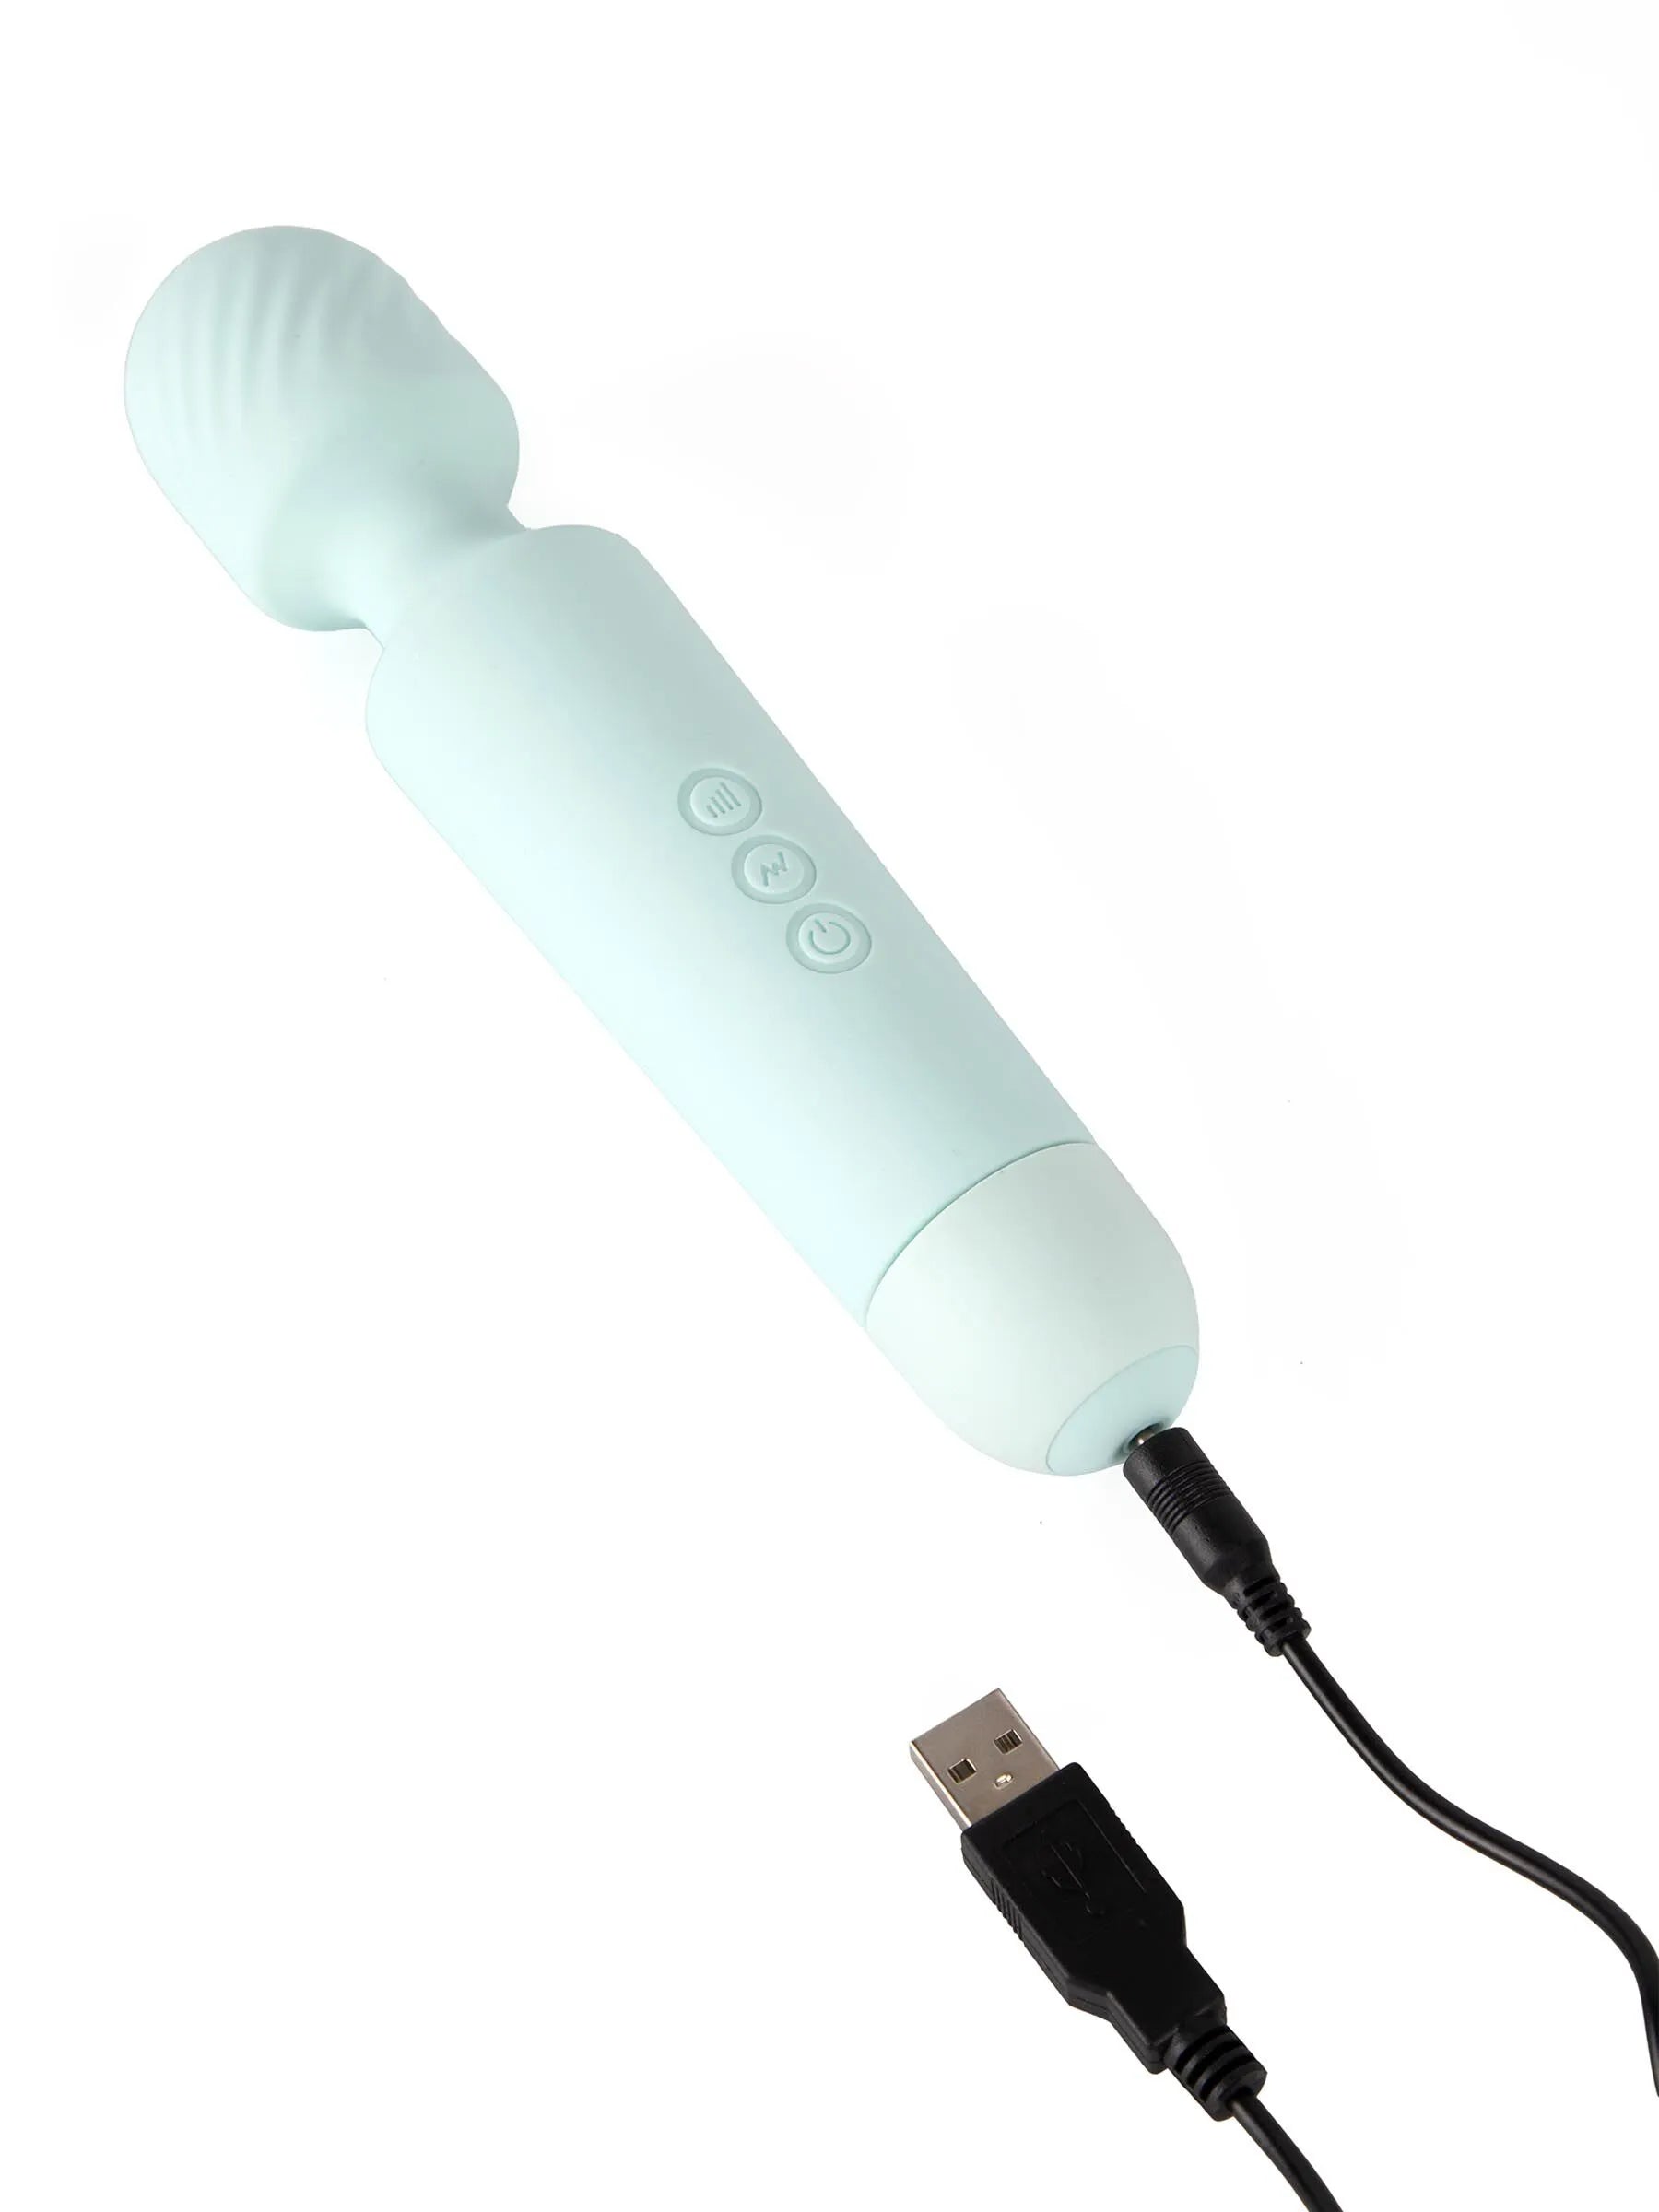 My Viv Massage Wand From Ann Summers, Image 01